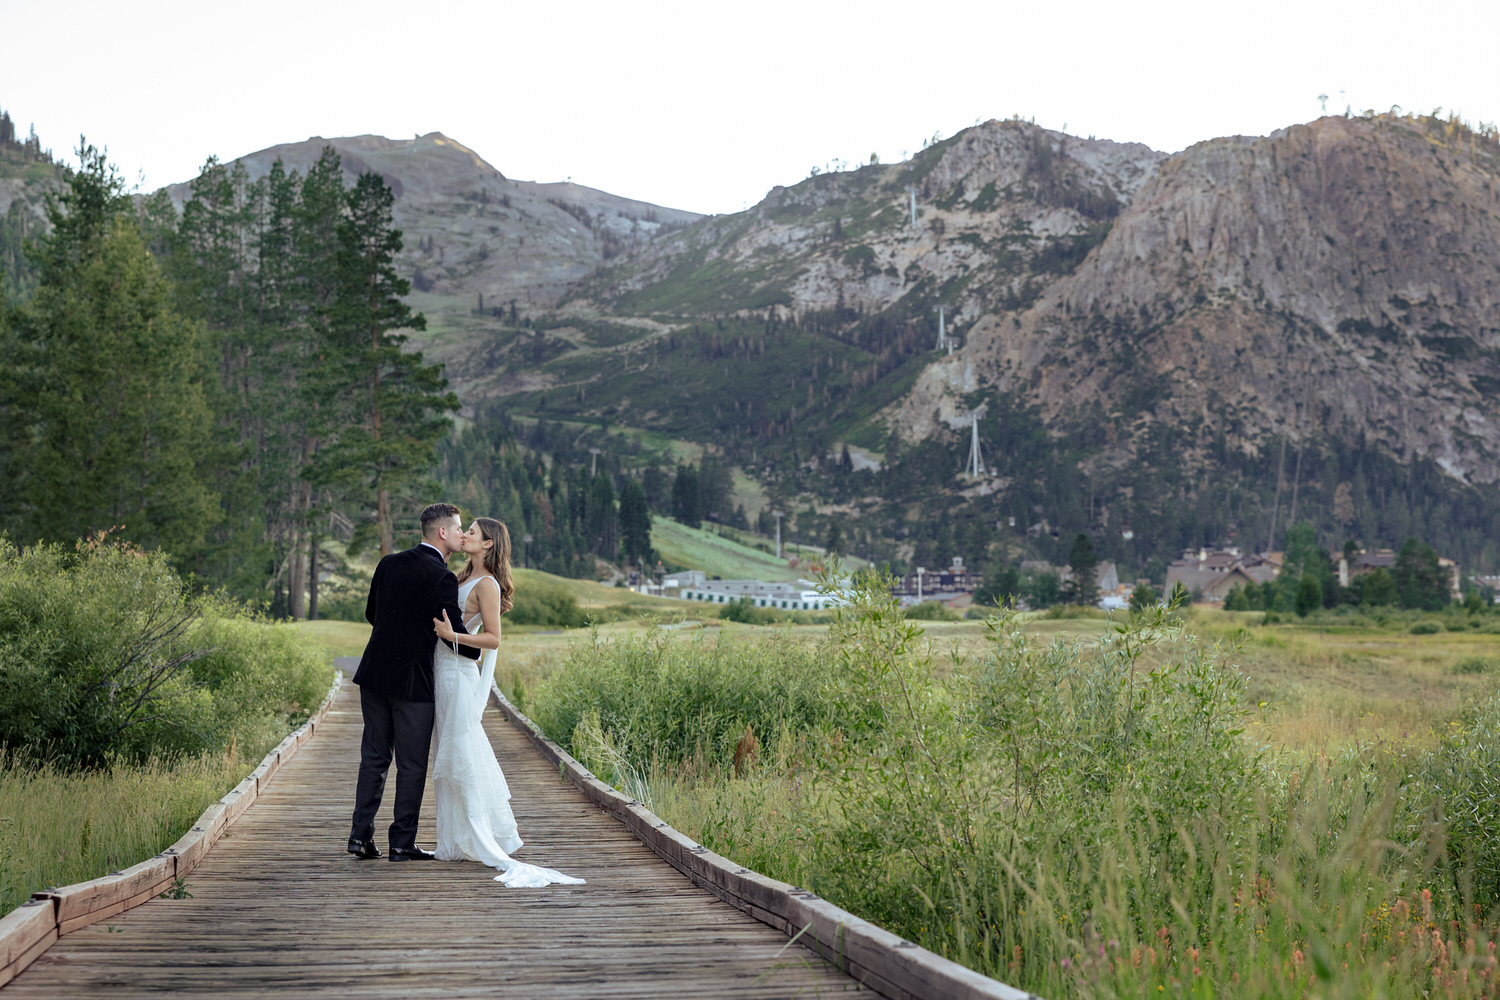 The bride and groom share a kiss at a  sunset photo location in Olympic Valley.